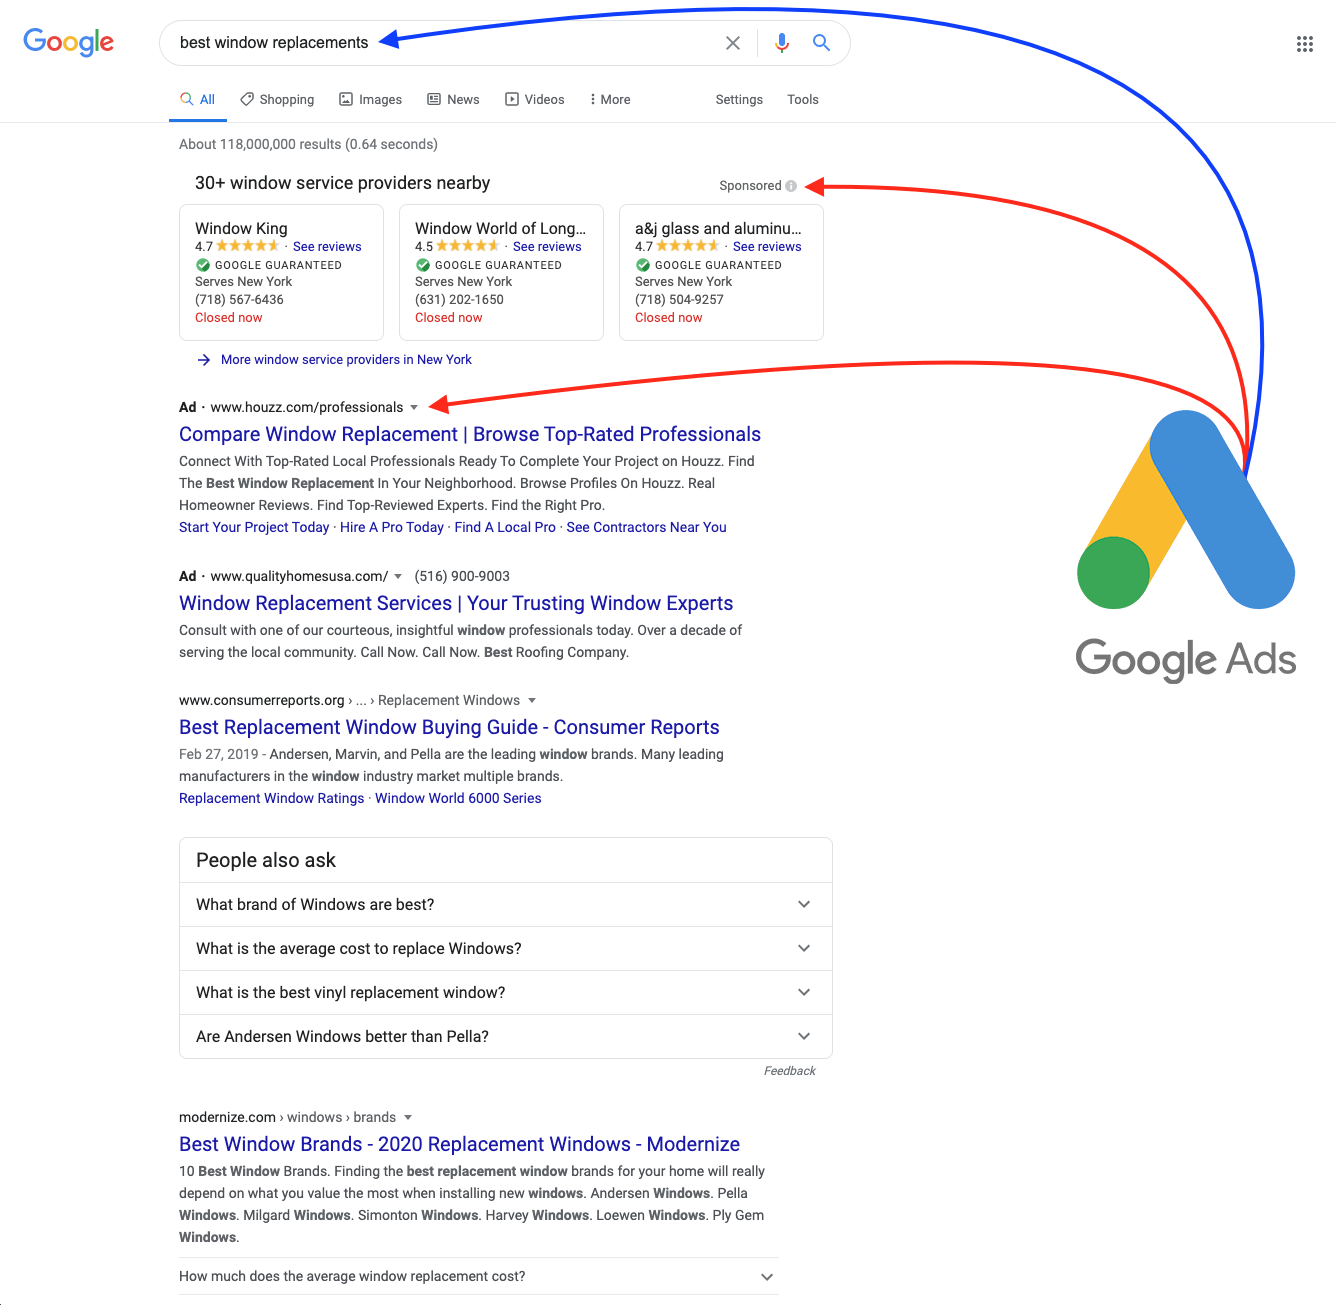 Search Engine Results Page with Google Ads